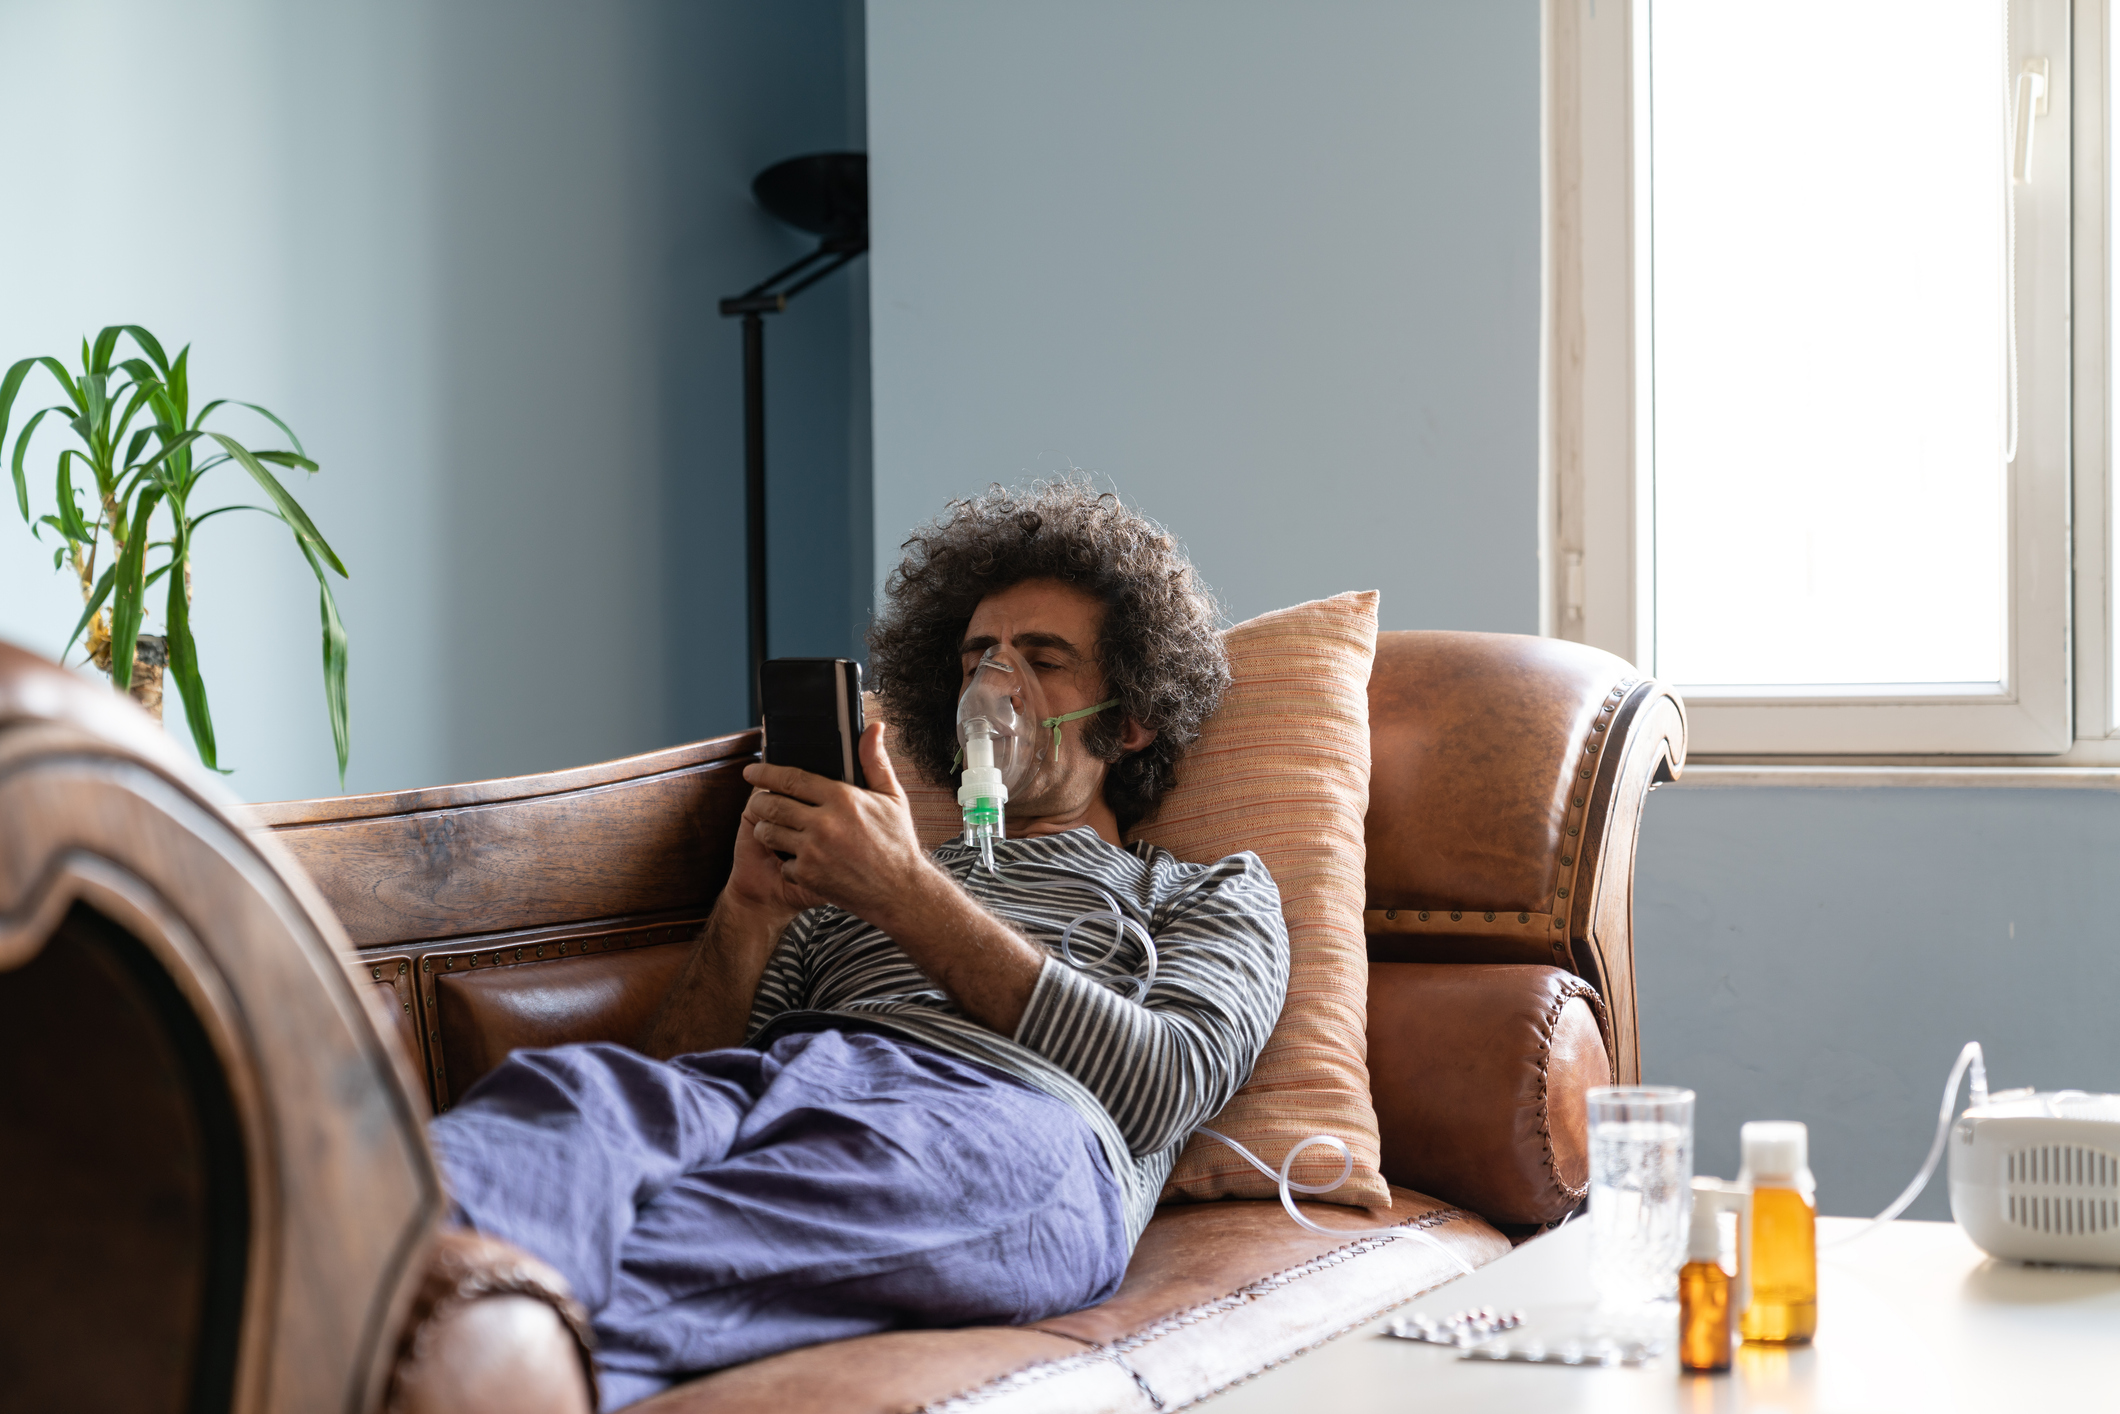 Mature adult man lying down on sofa in living room and using nebulizer during coronavirus pandemic. He is wearing sleepwear and using smartphone for communication. Shot indoor with a full frame mirrorless camera.